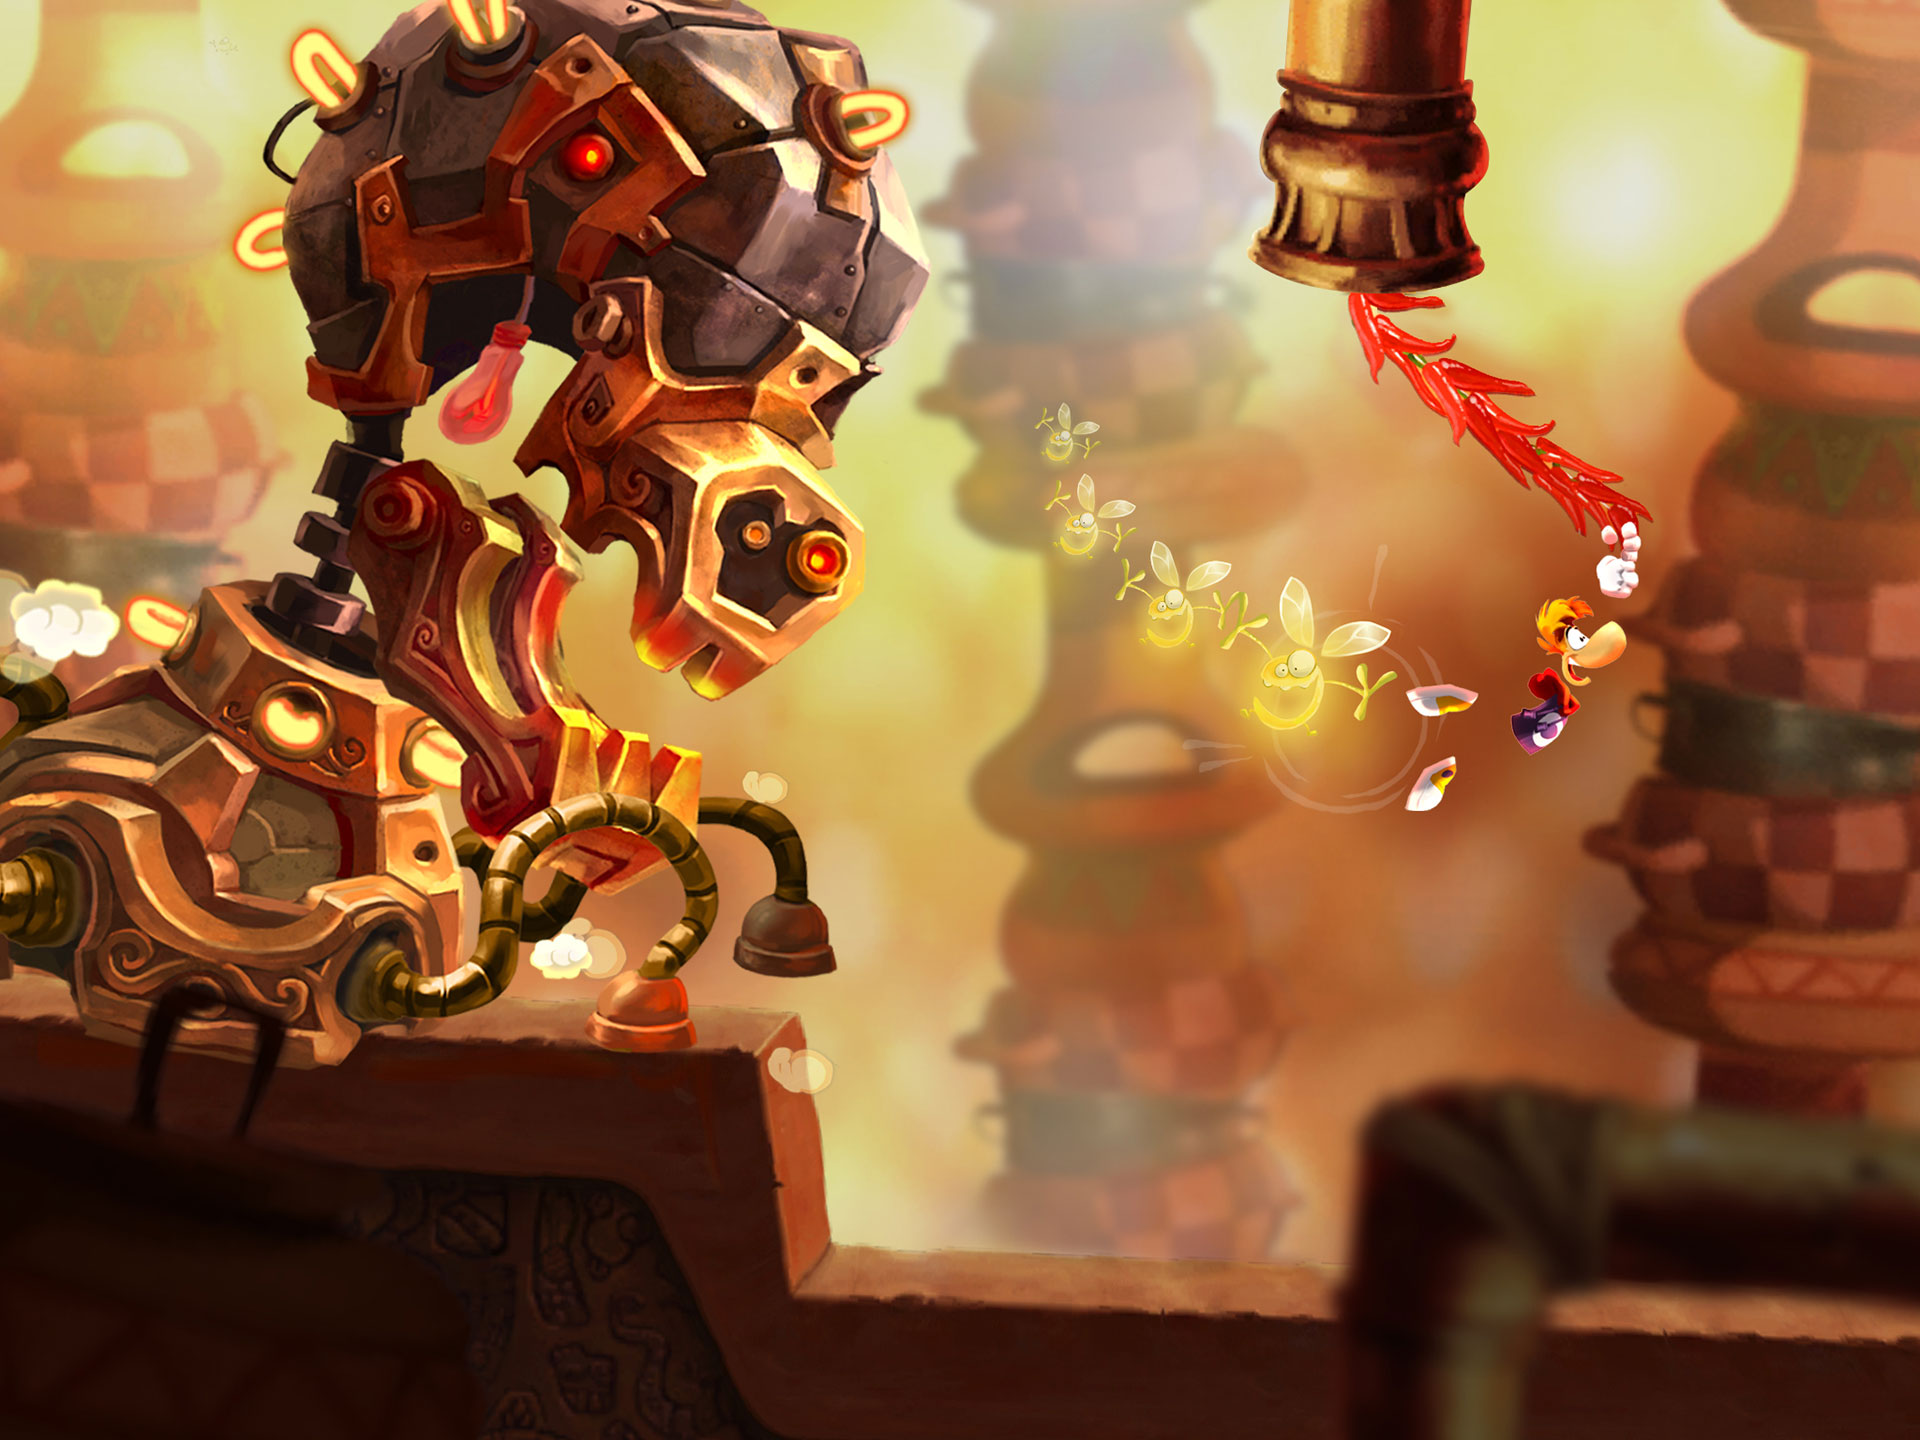 App Review: Another Practically Perfect Platformer For Rayman